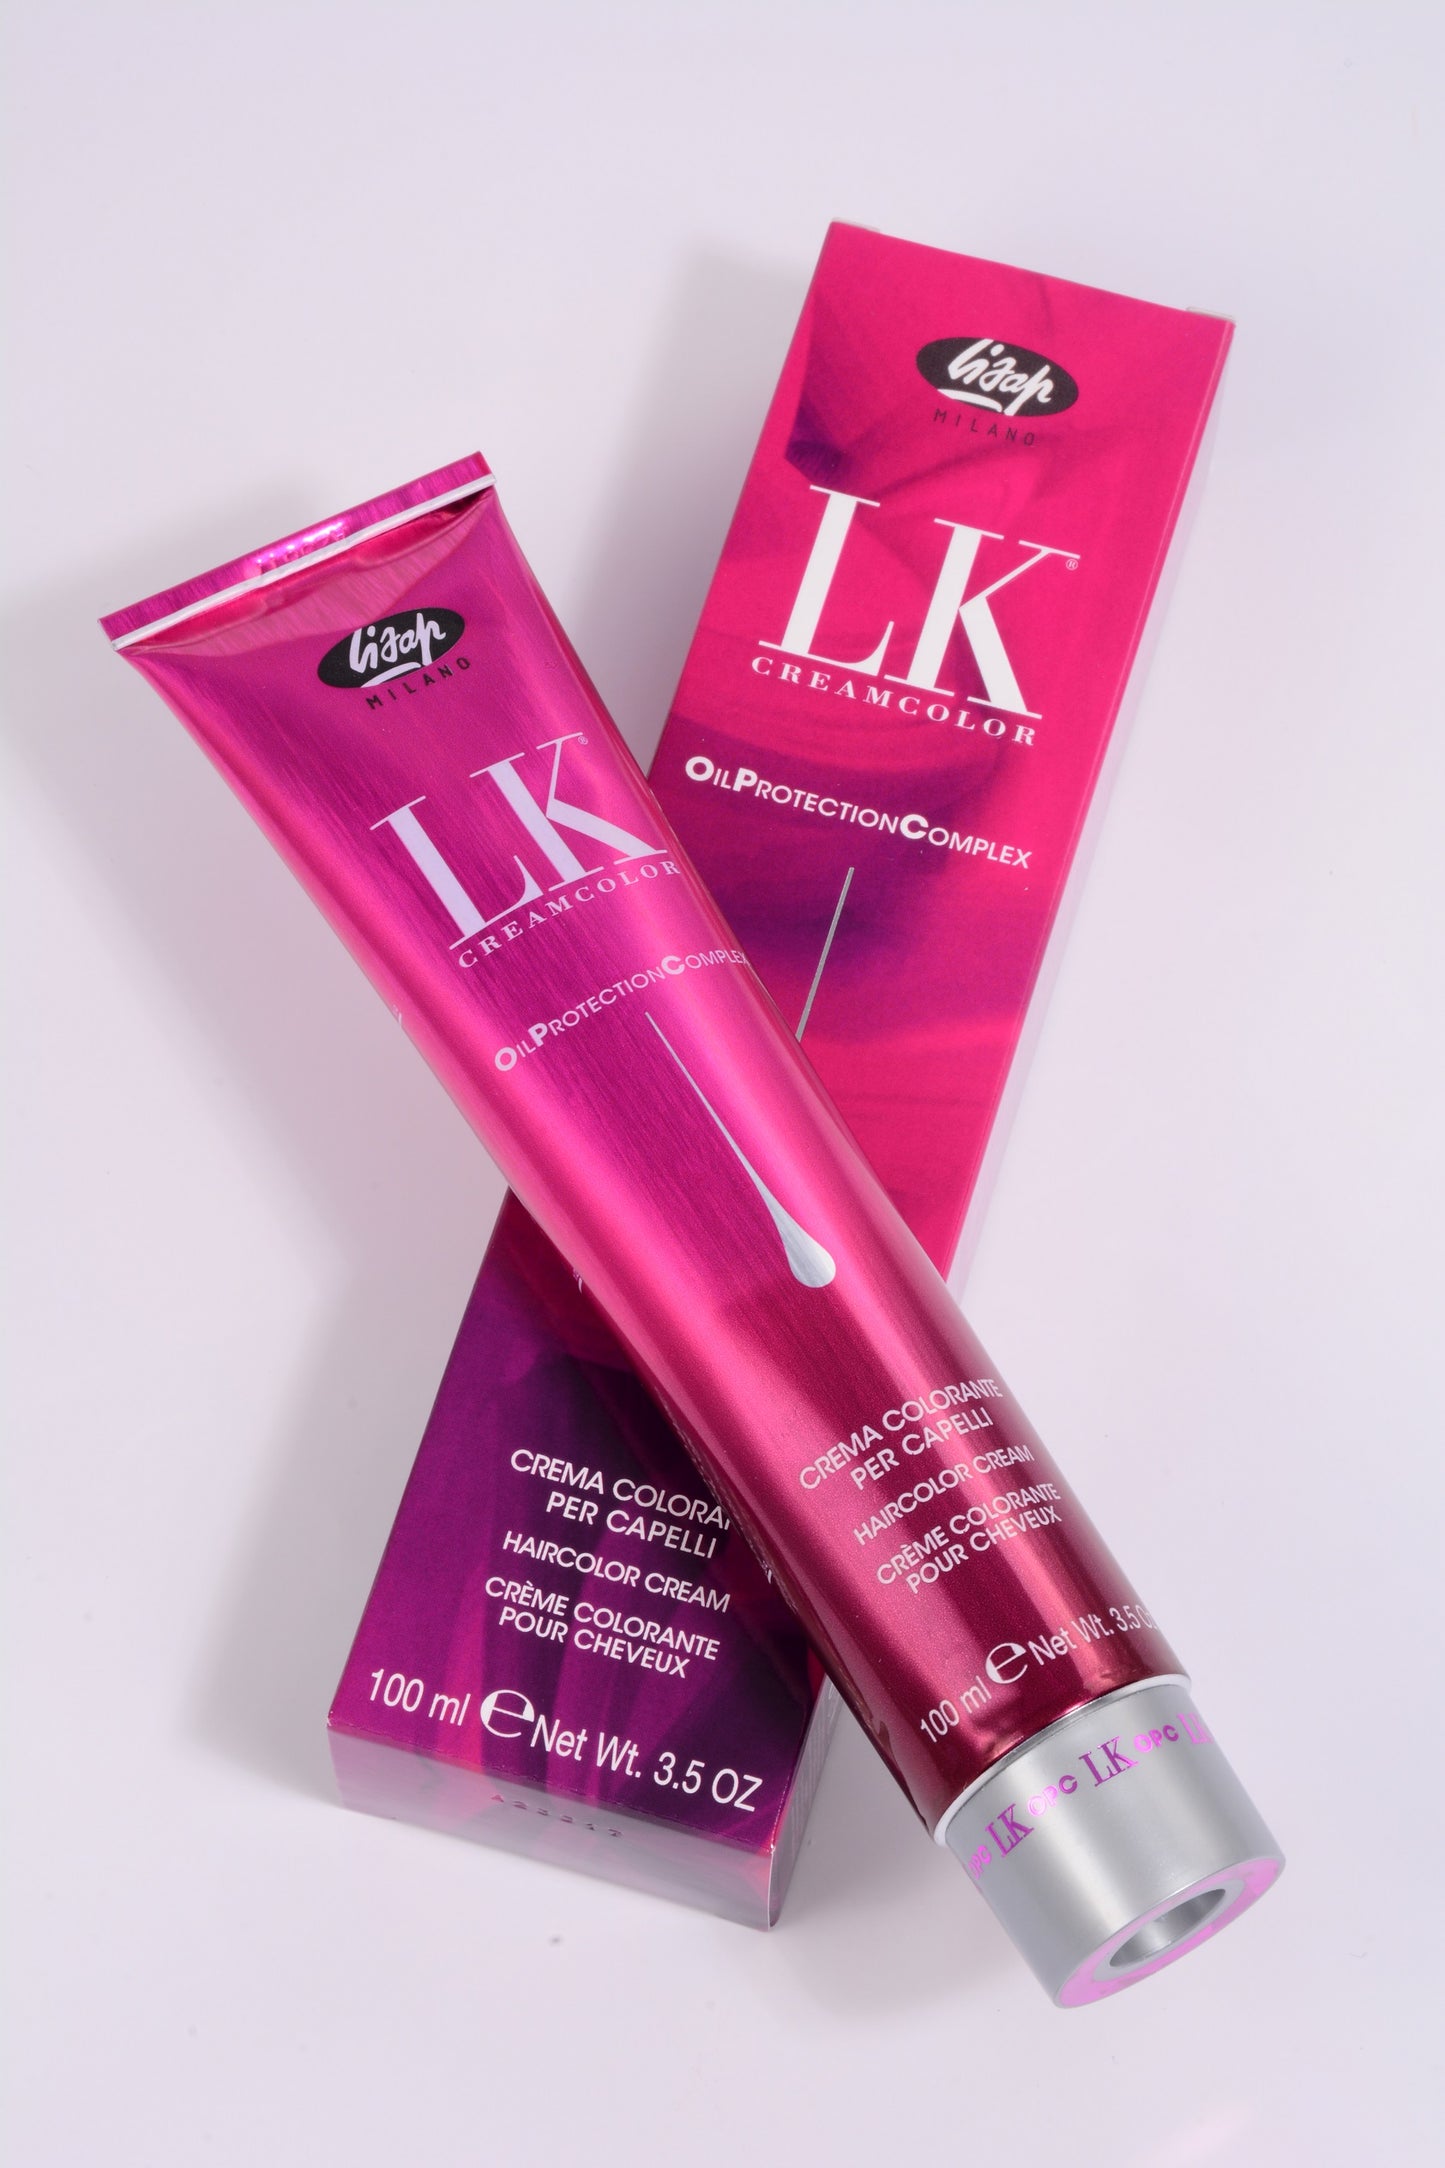 LK Creamcolor 9/0 Oil Protection Complex